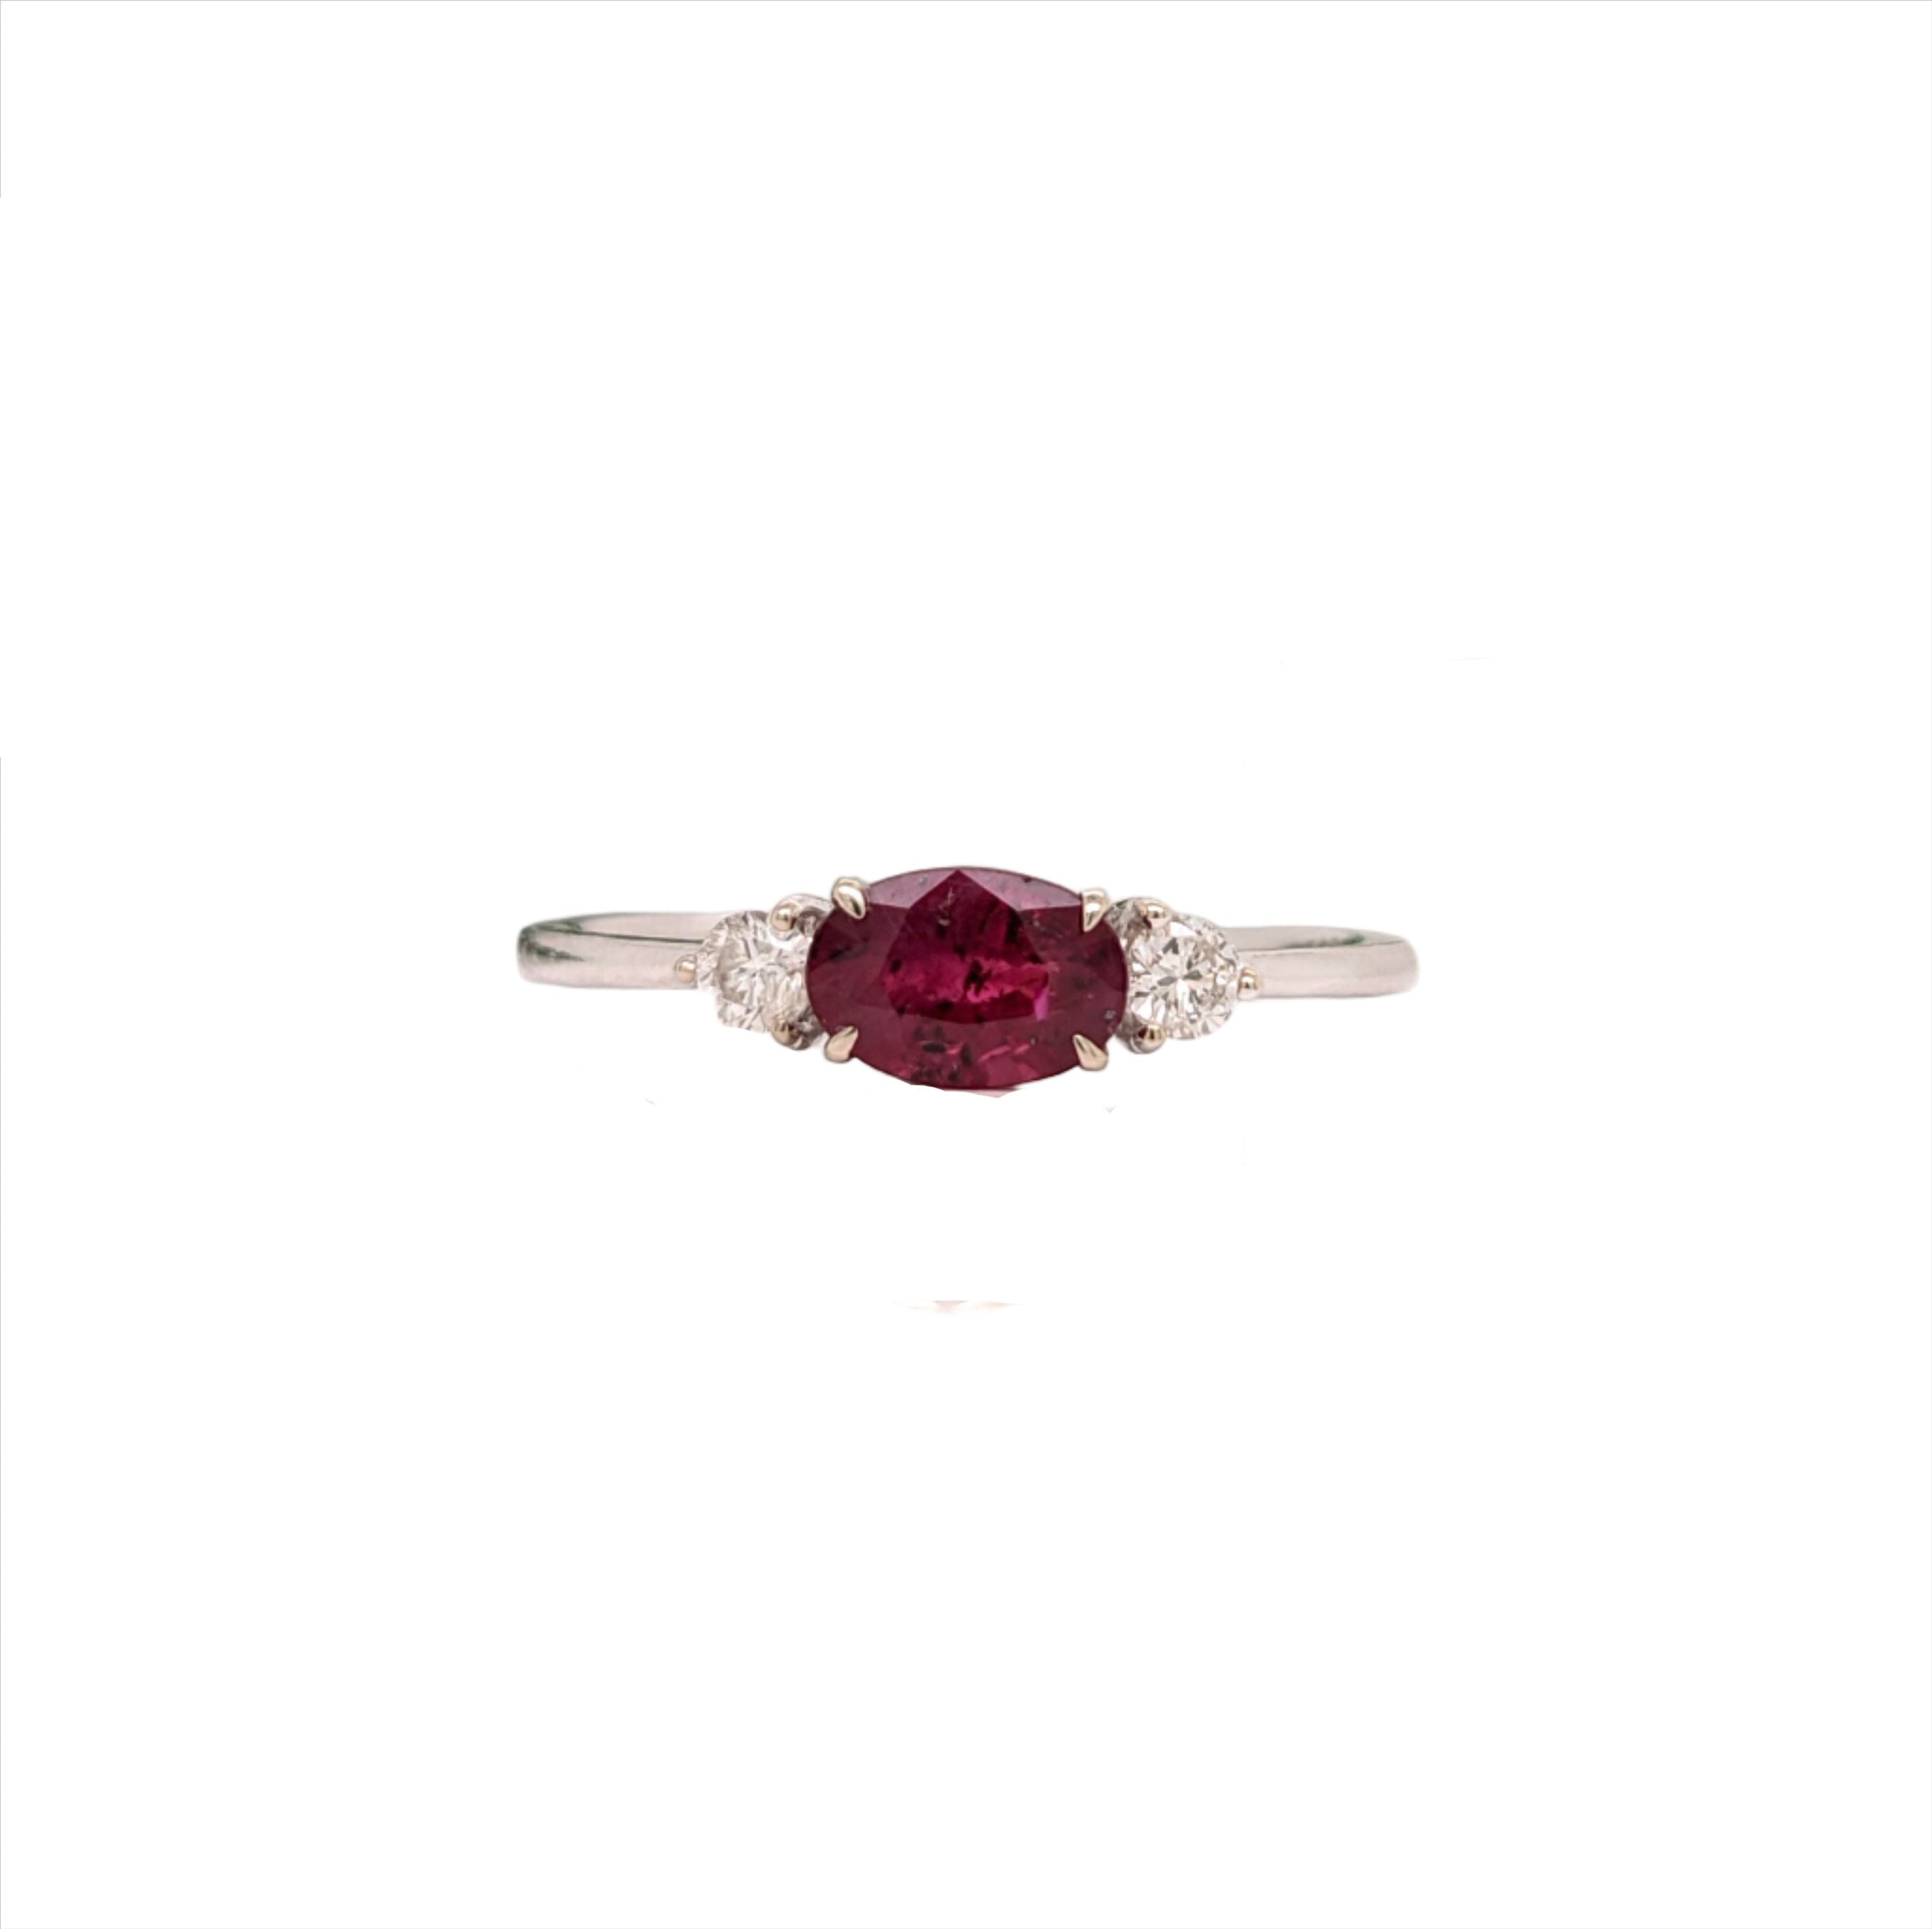 Genuine Heated Ruby Ring in 14K White Gold with Natural Diamond Accents | Oval 6x4mm | July Birthstone | Pigeon Blood Red Ruby | Petite Ring